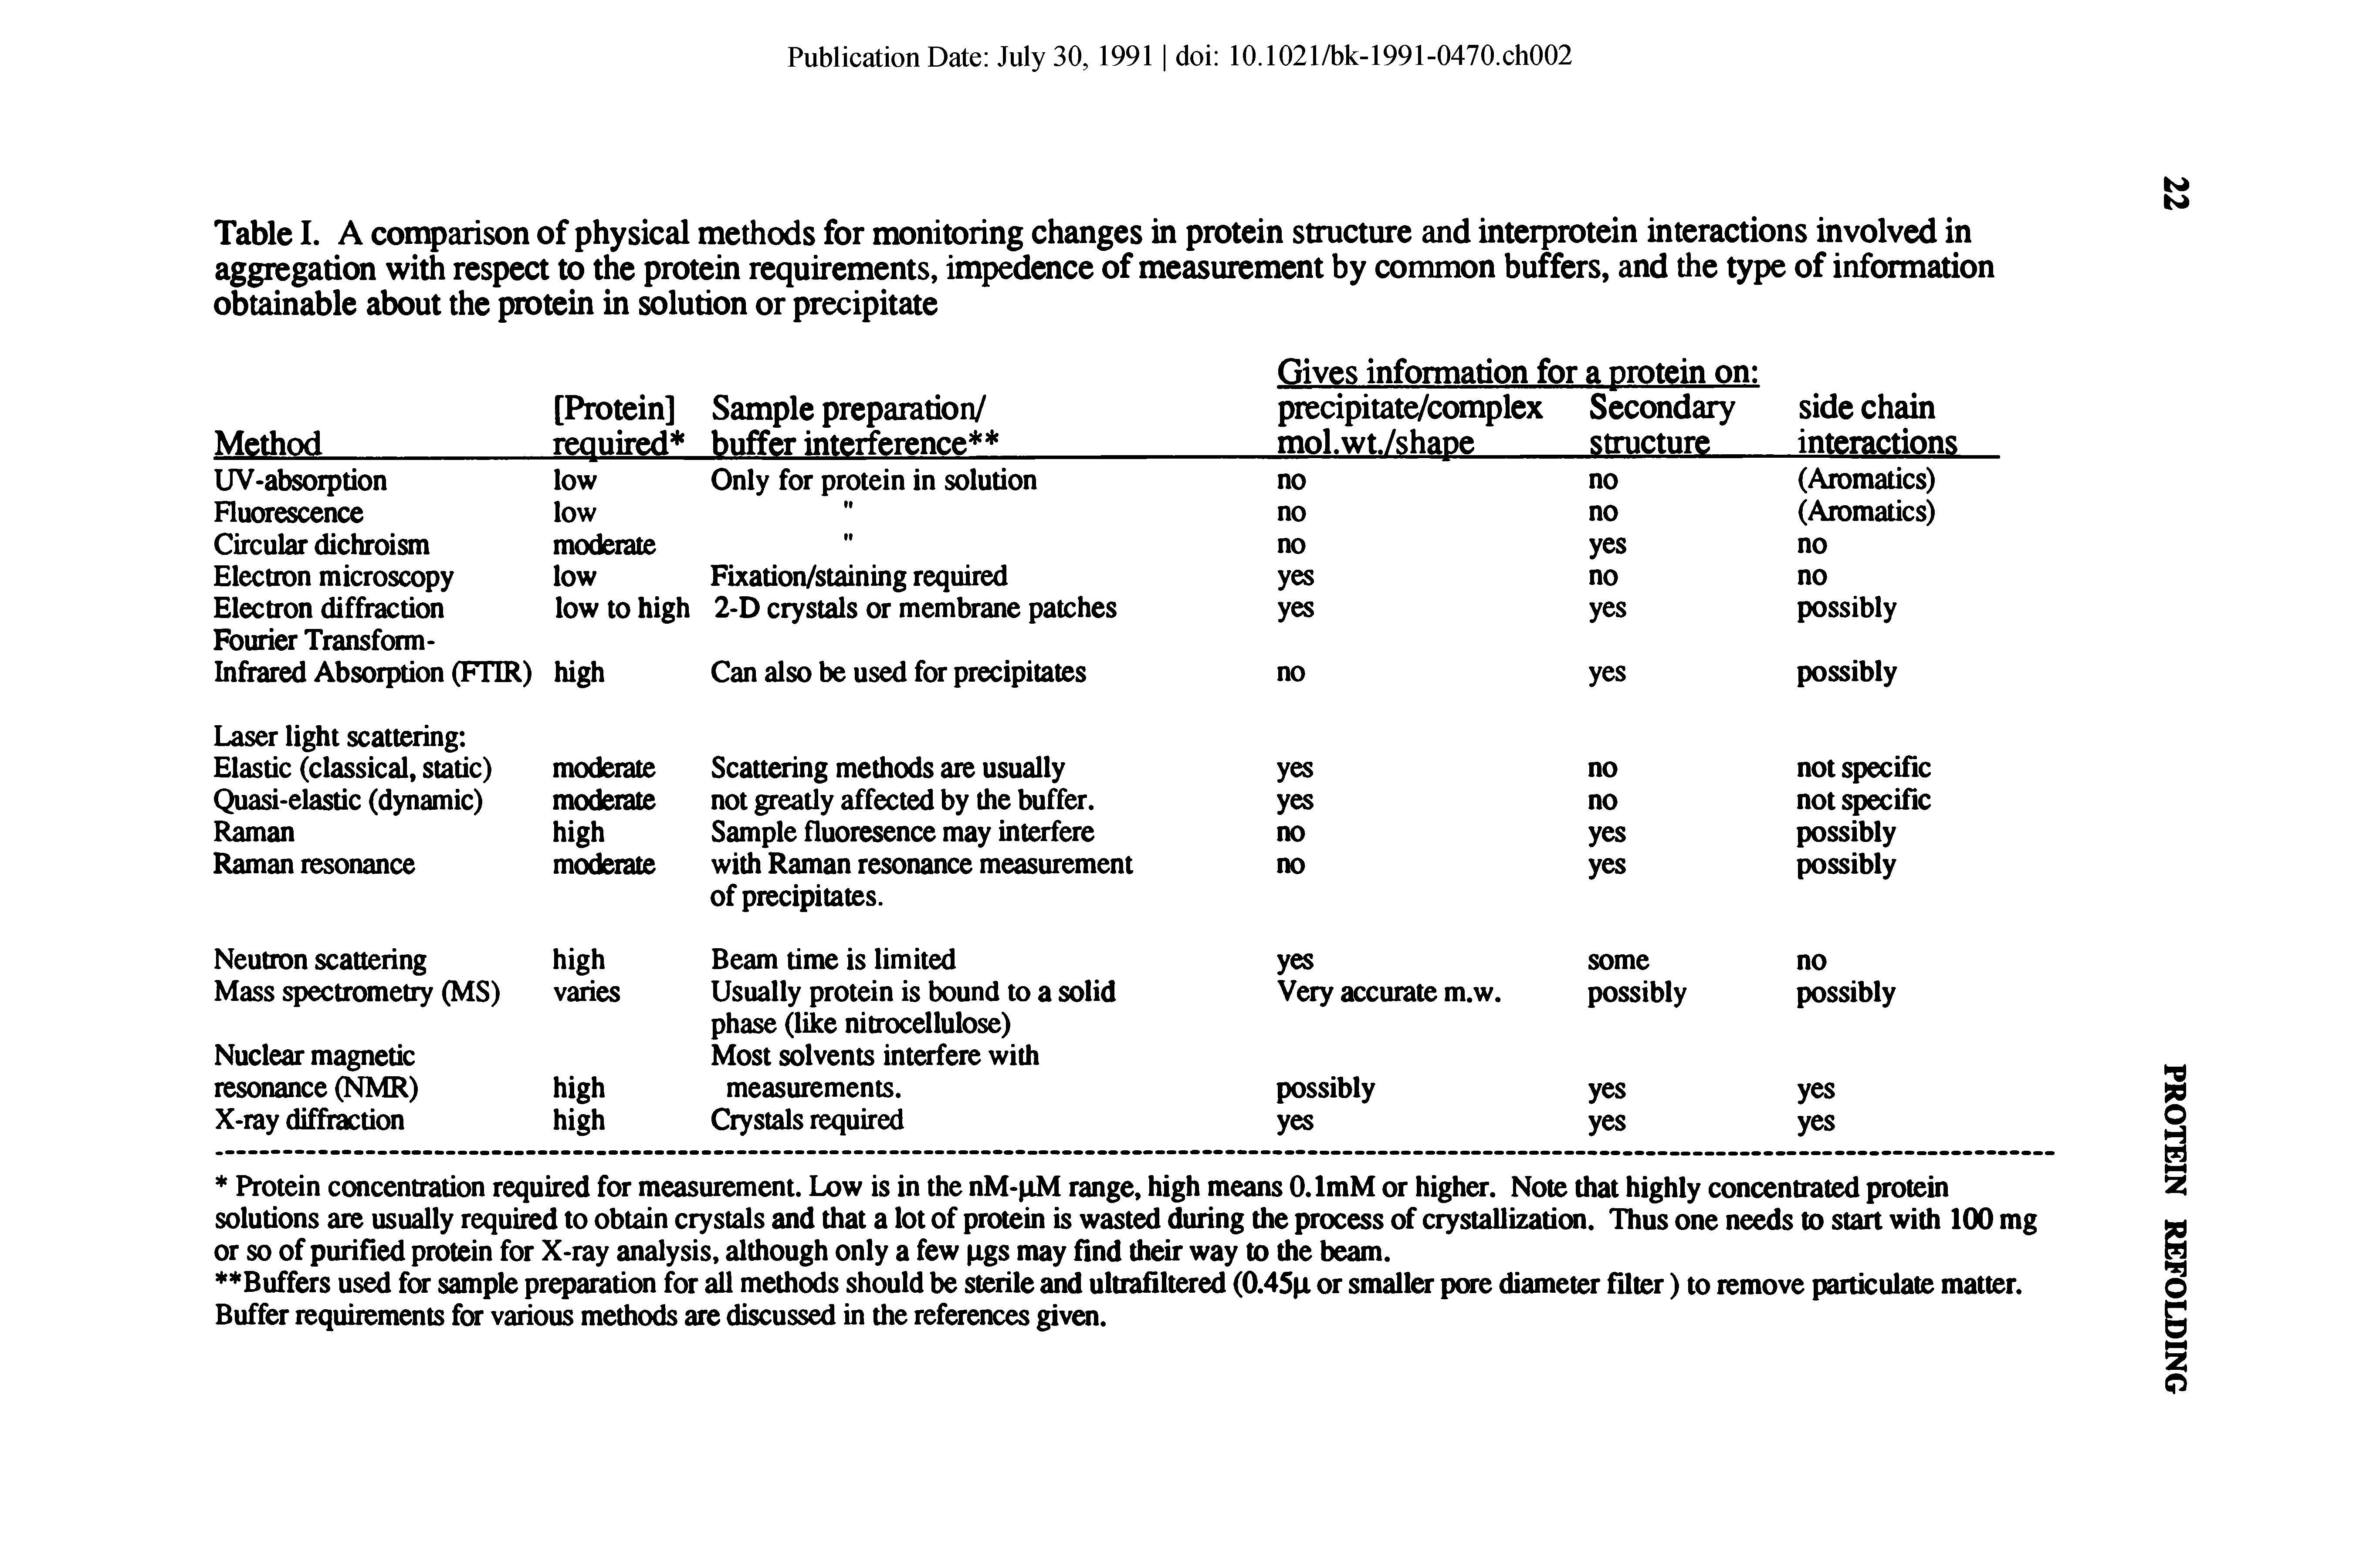 Table I. A comparison of physical methods for monitoring changes in protein structure and interprotein interactions involved in aggregation with respect to the protein requirements, impedence of measurement by common buffers, and the type of information obtainable about the protein in solution or precipitate...